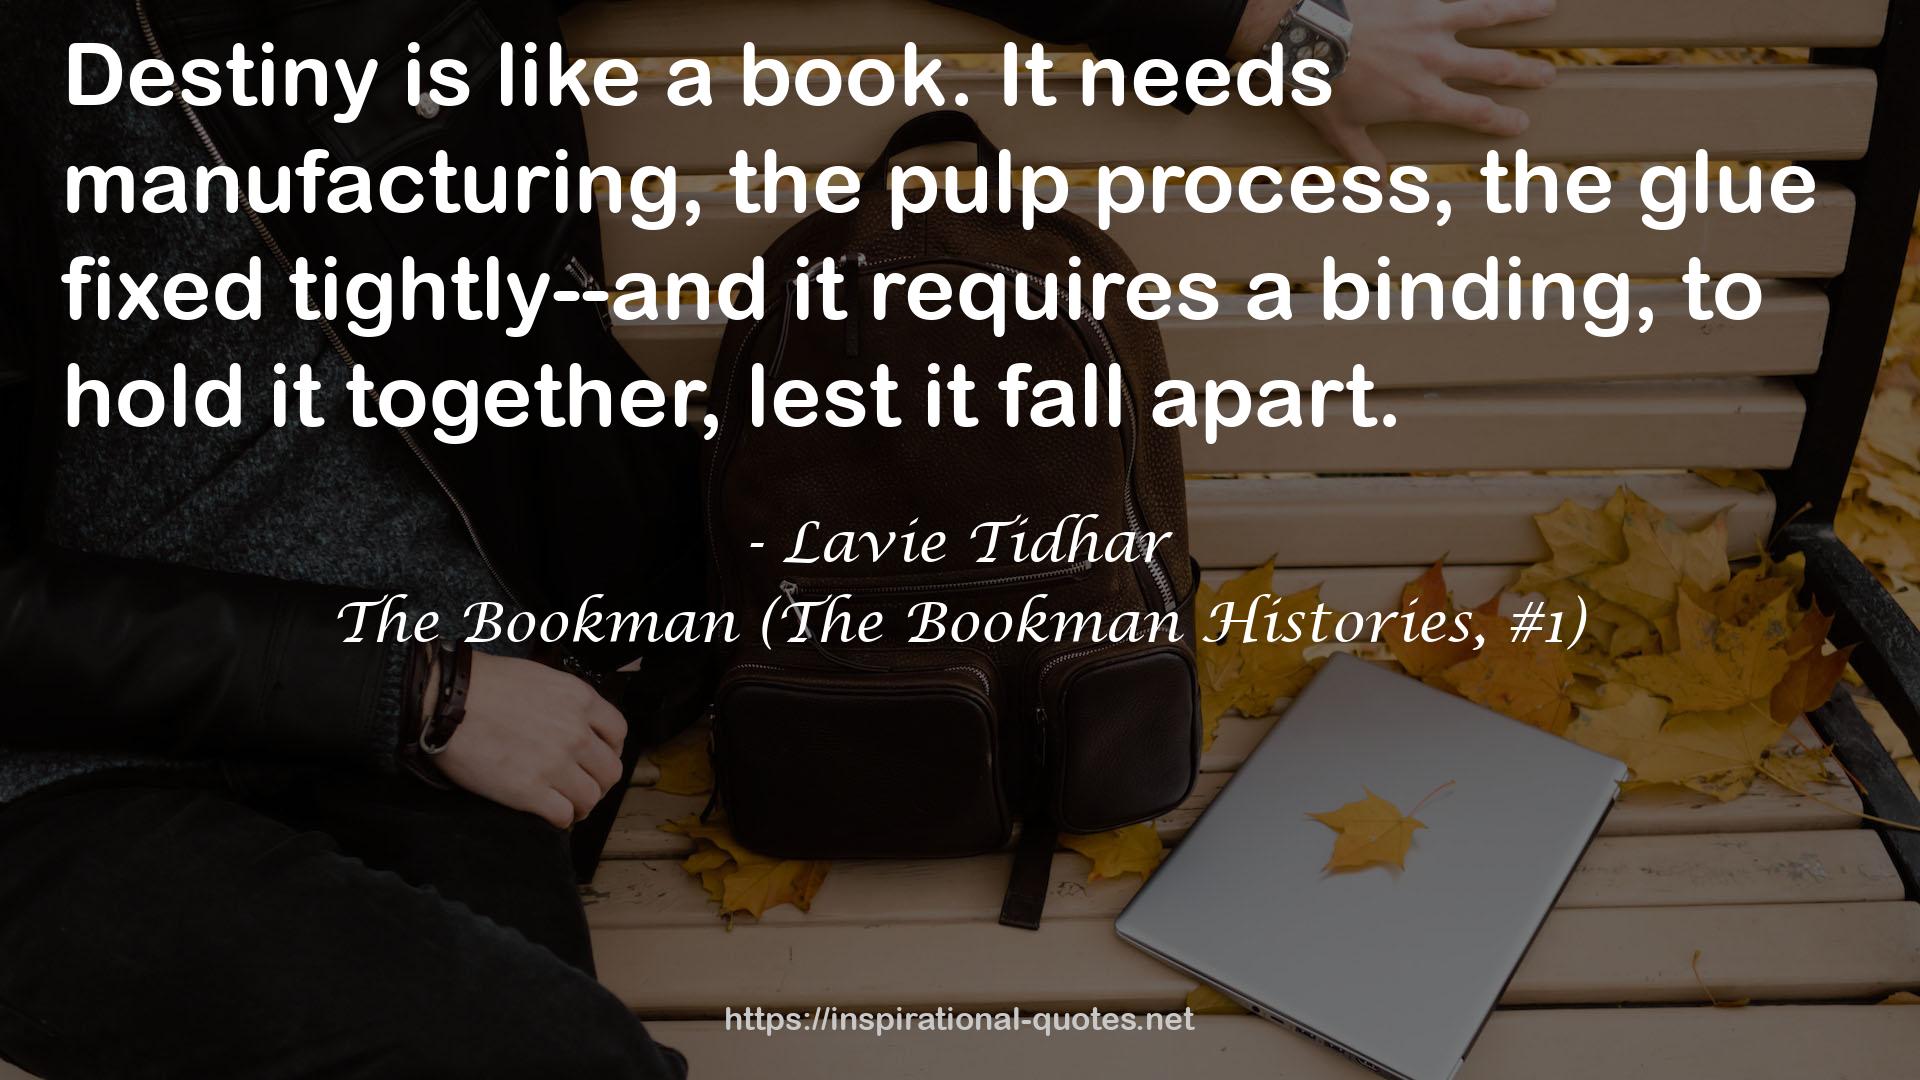 The Bookman (The Bookman Histories, #1) QUOTES